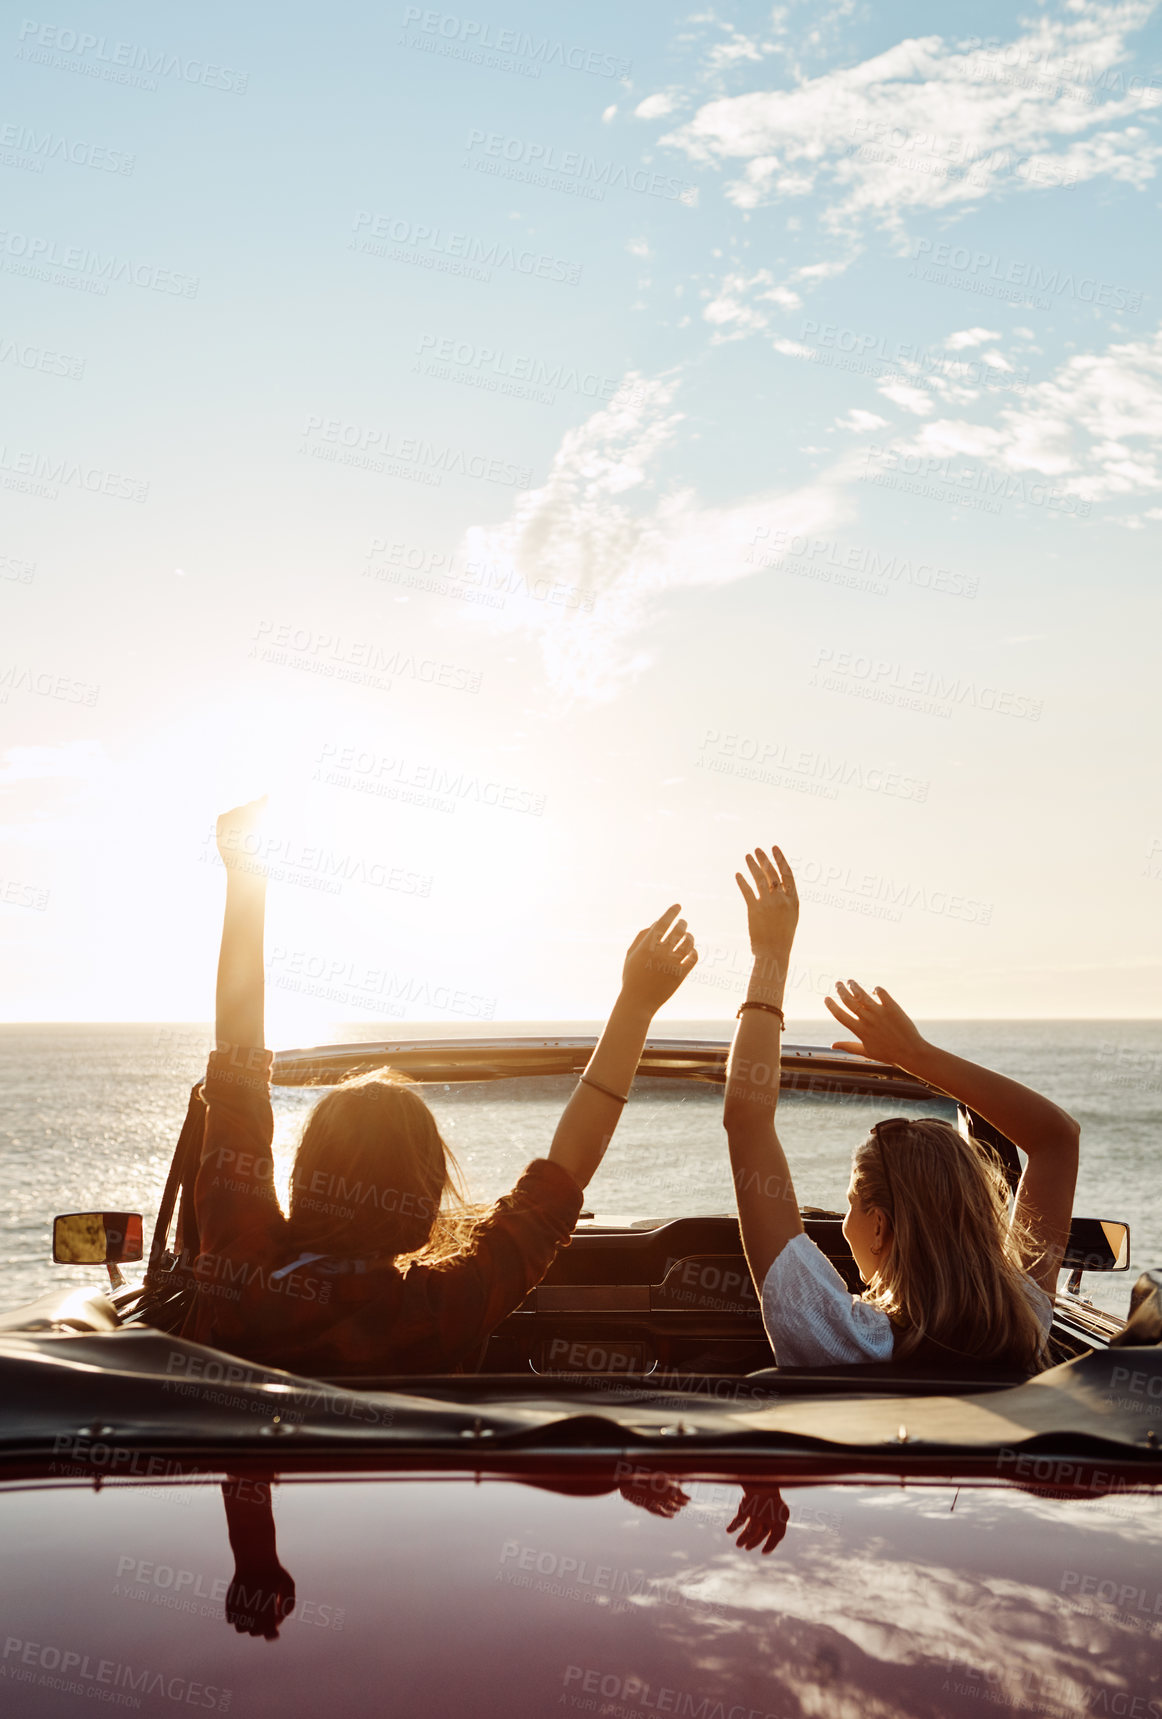 Buy stock photo Shot of a two happy young women enjoying a summer’s road trip together